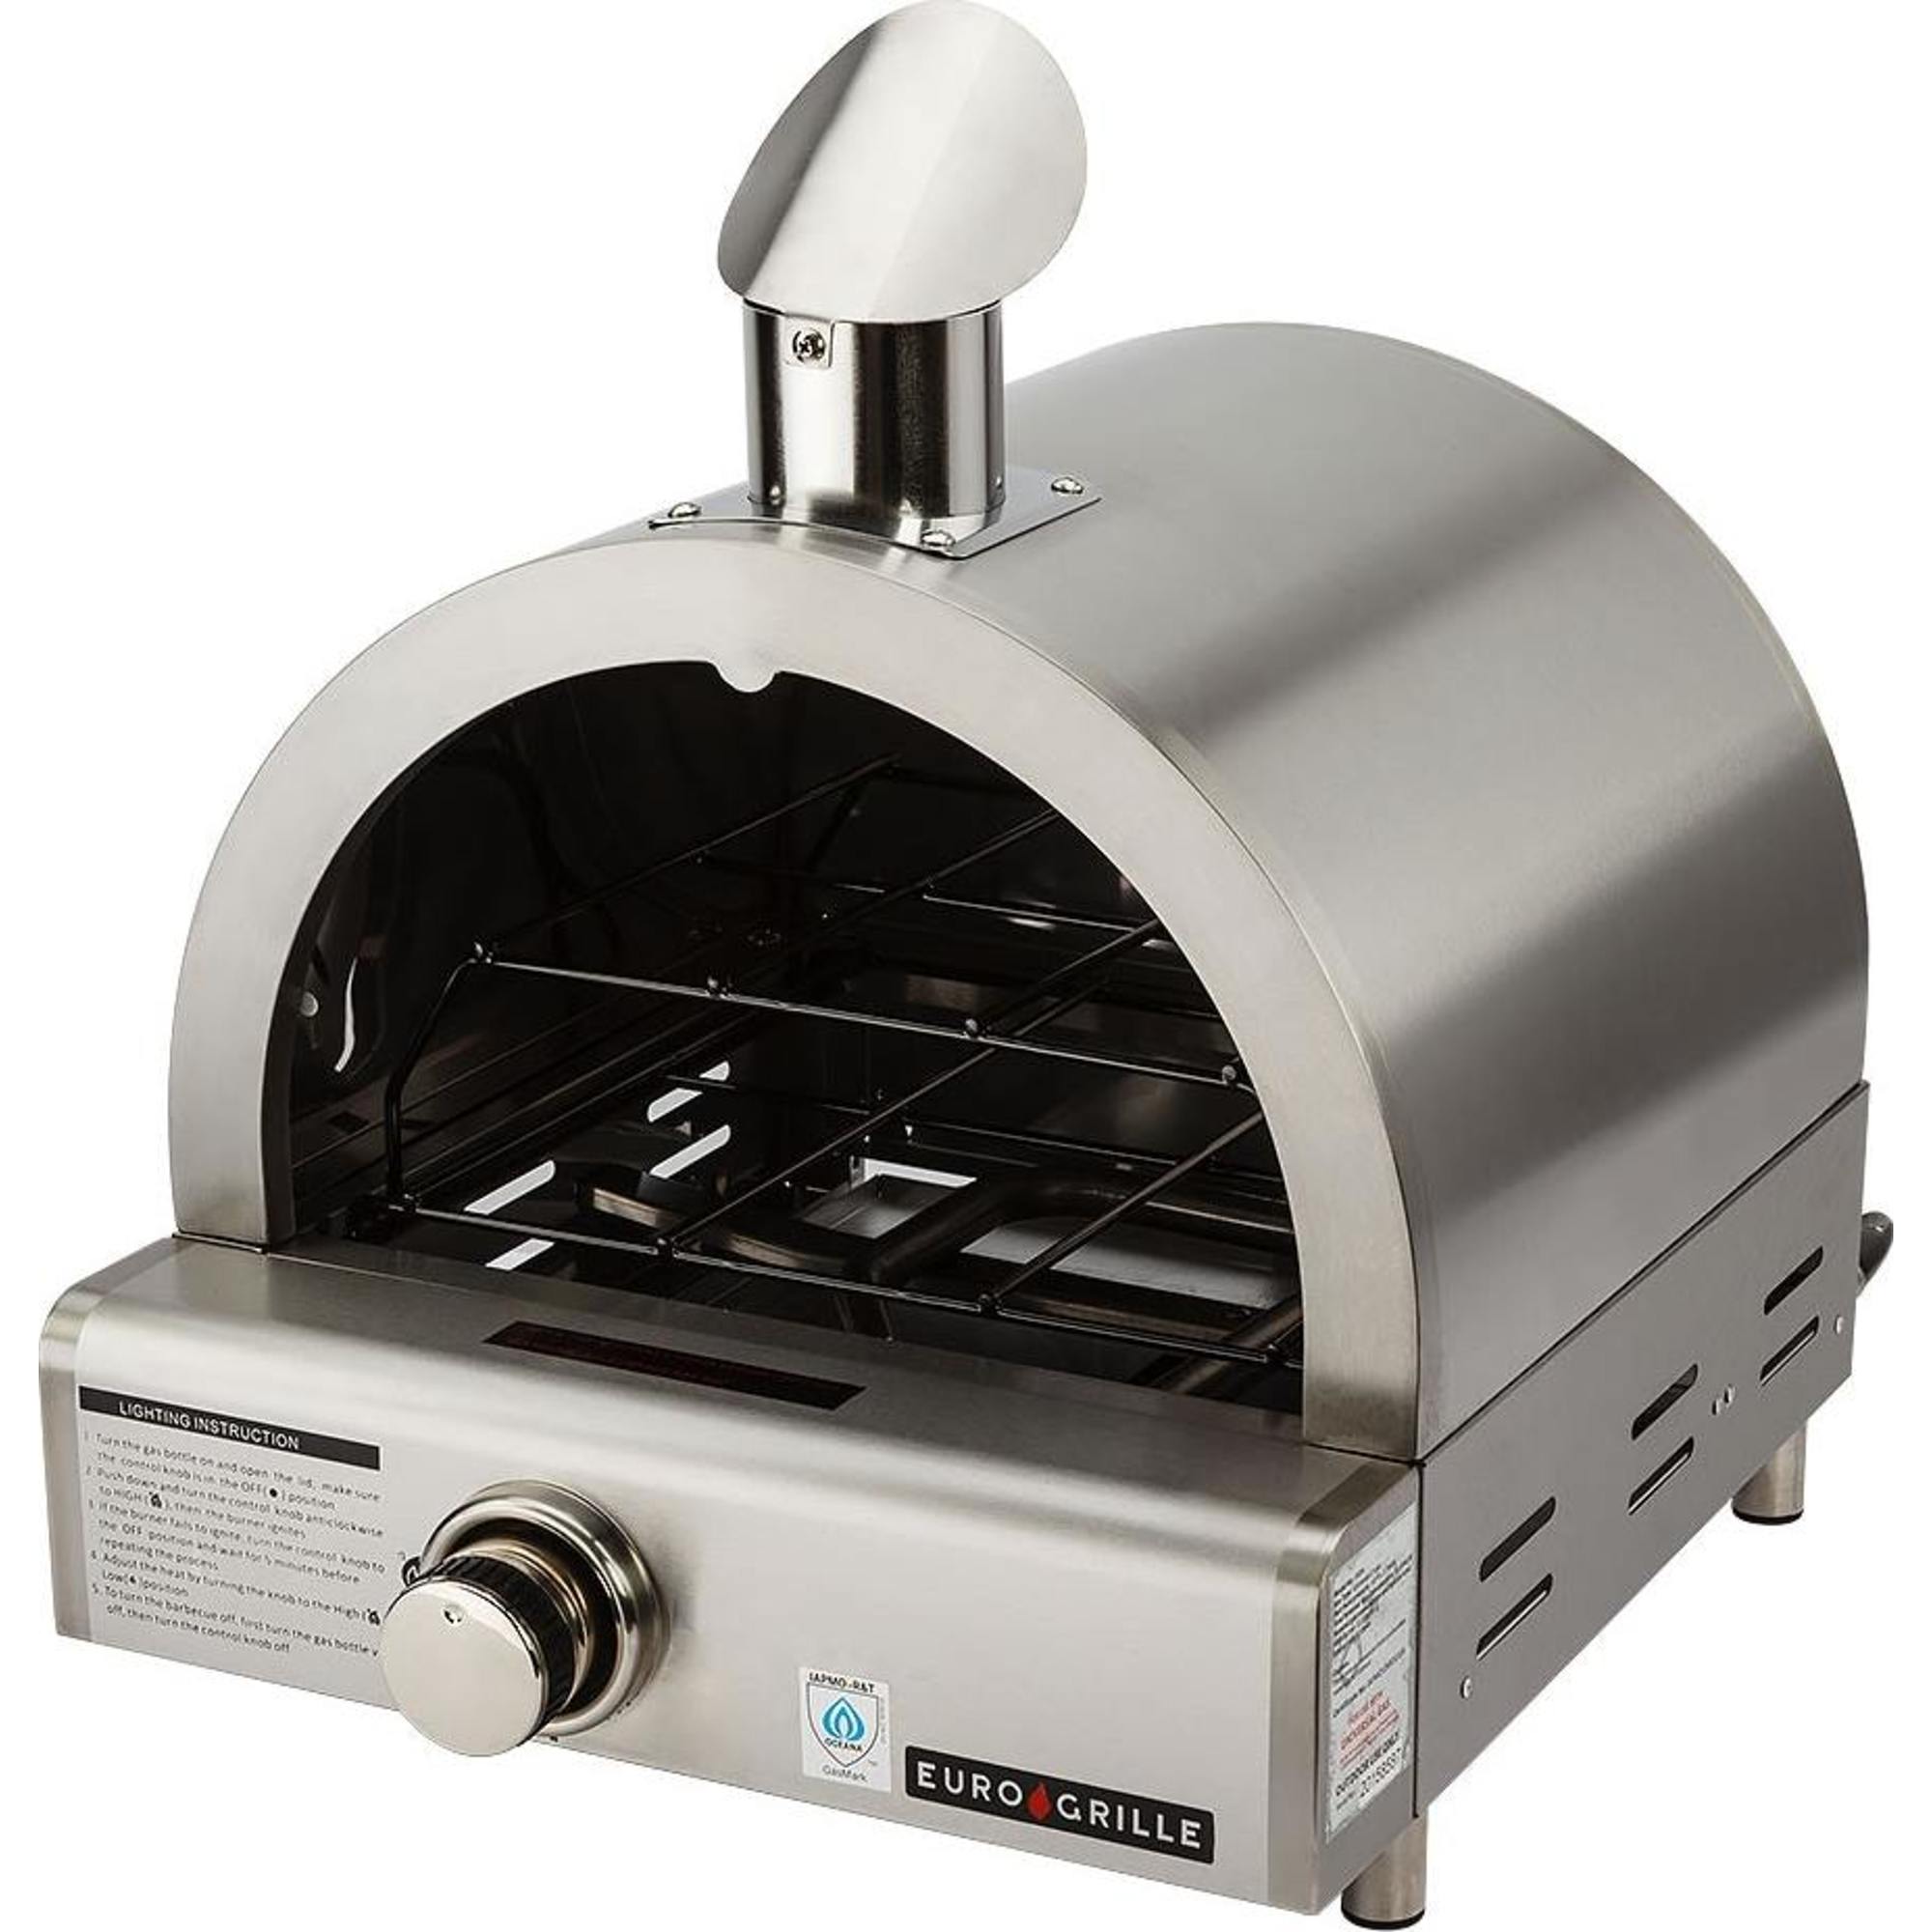 EuroGrille Benchtop Elite Pizza Oven_1